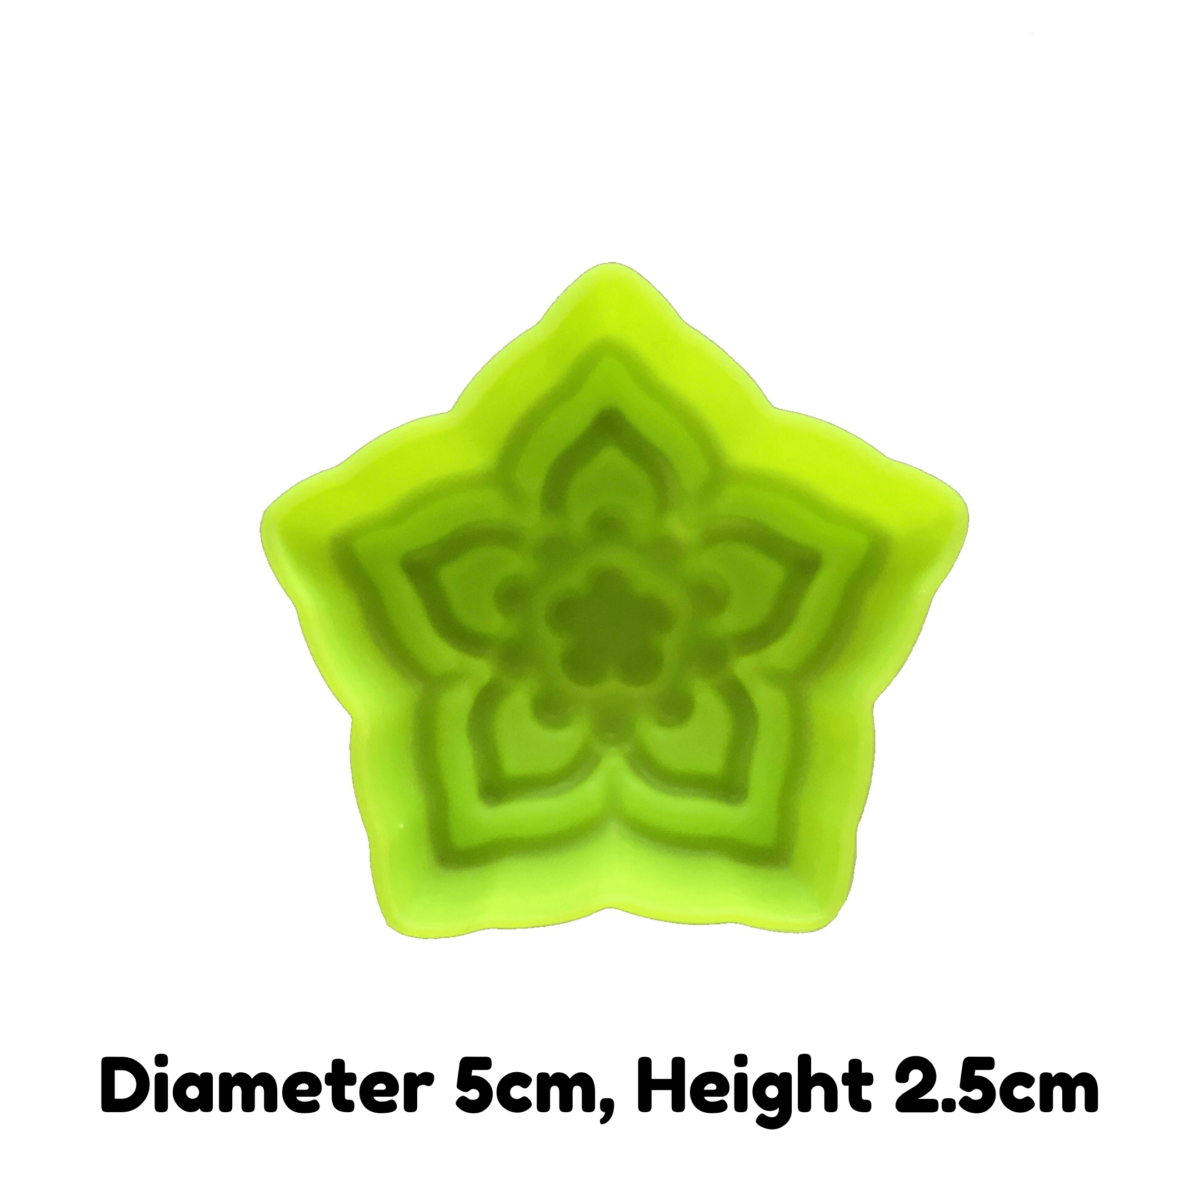 written dimensions of 5cm green star jasmine flower single cavity silicone mould